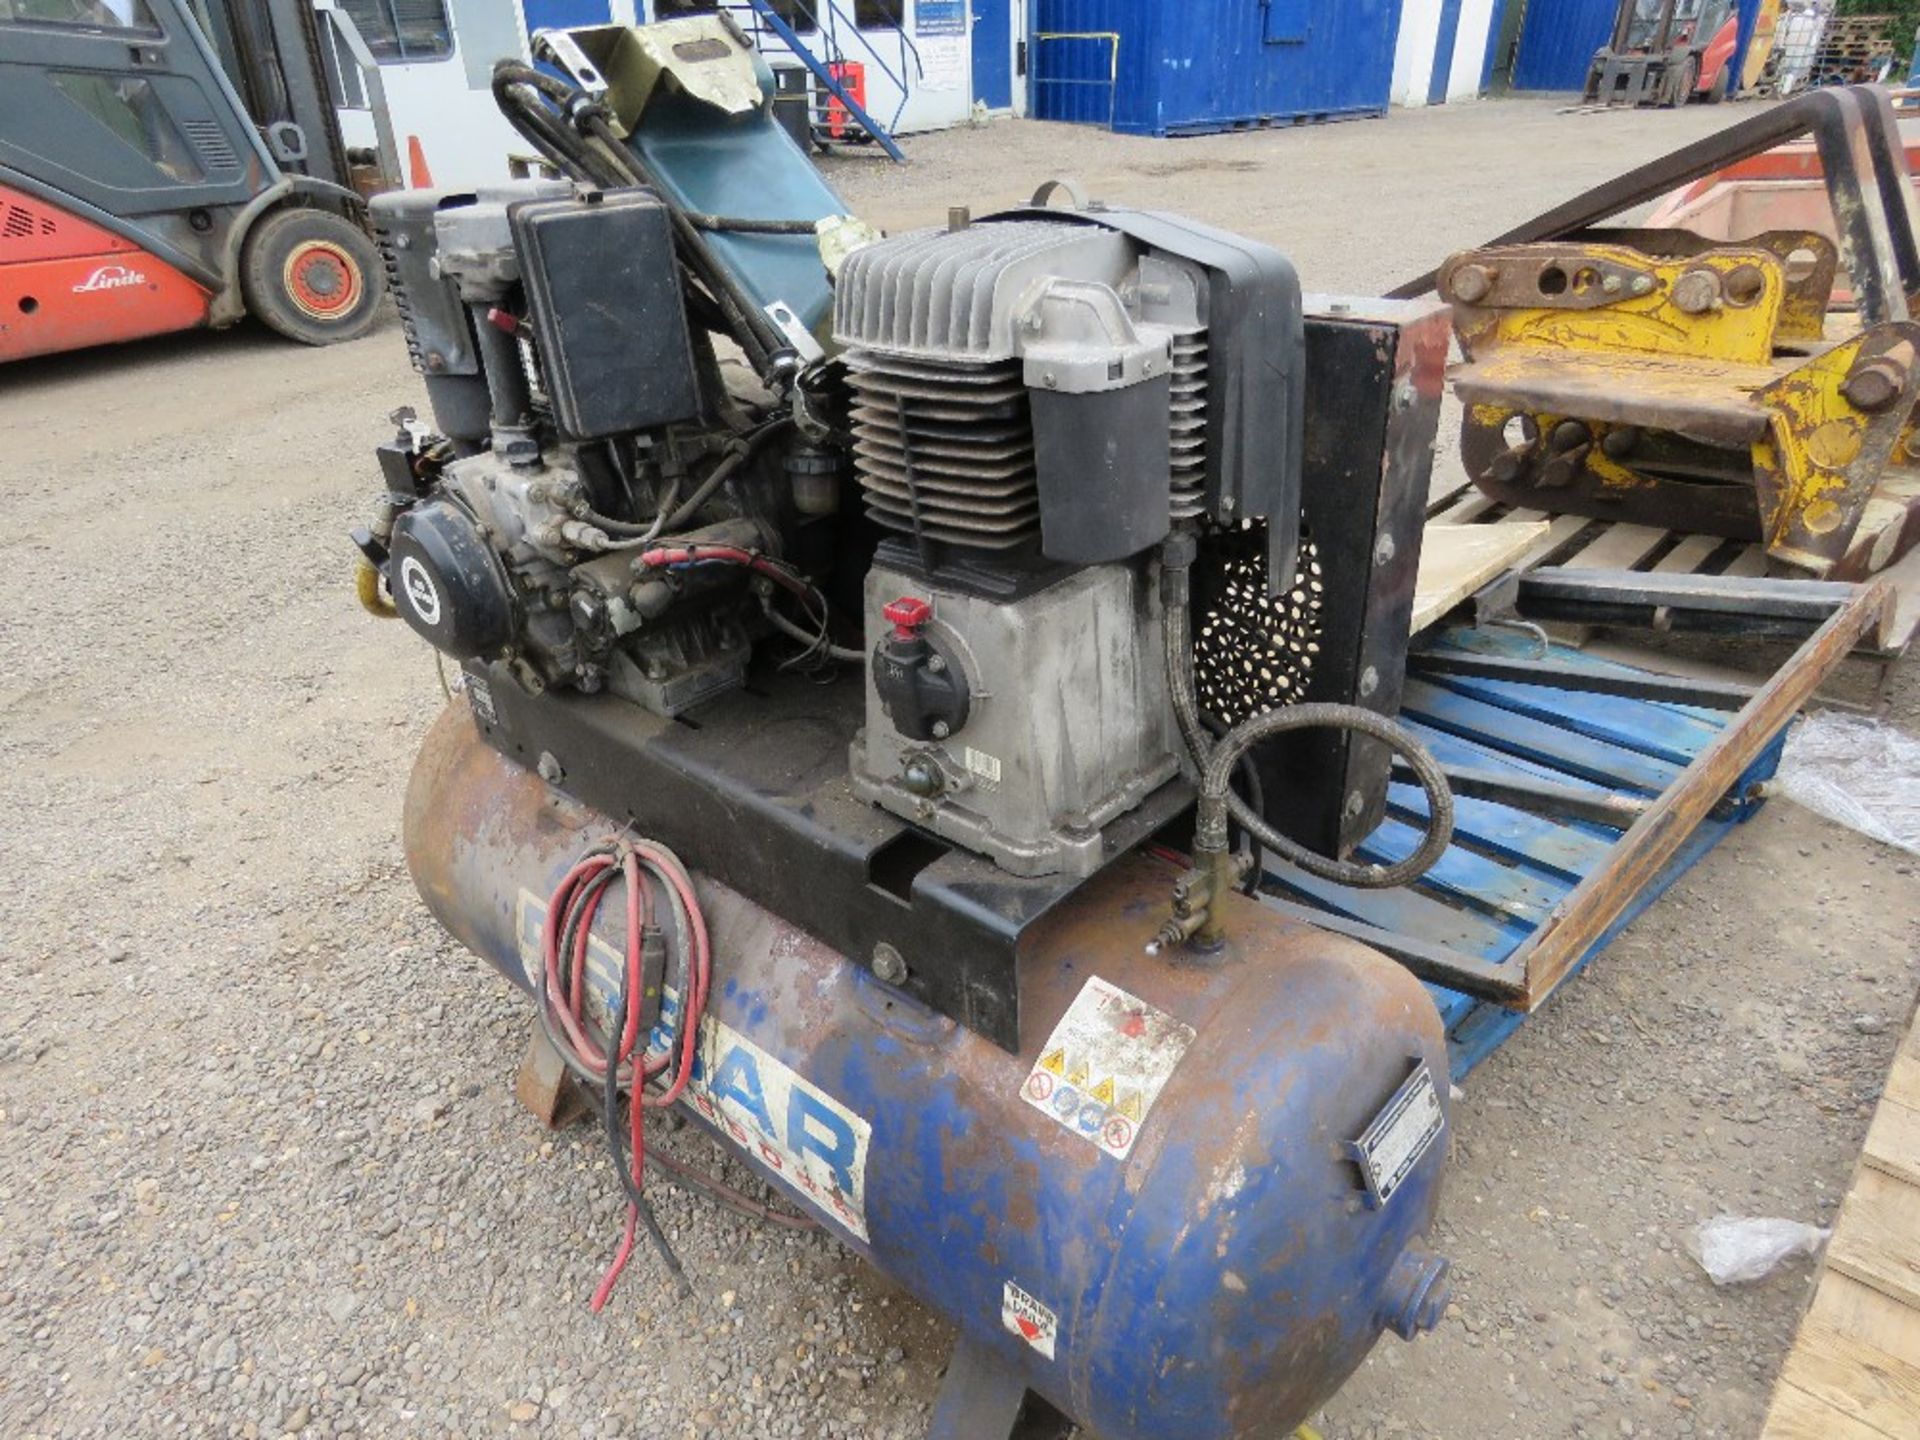 PSIBAR ROBIN ENGINED COMPRESSOR WITH VAN MOUNTING FRAME. SUITABLE FOR TYRE FITTER ETC. SEEN RUNNING - Image 6 of 7